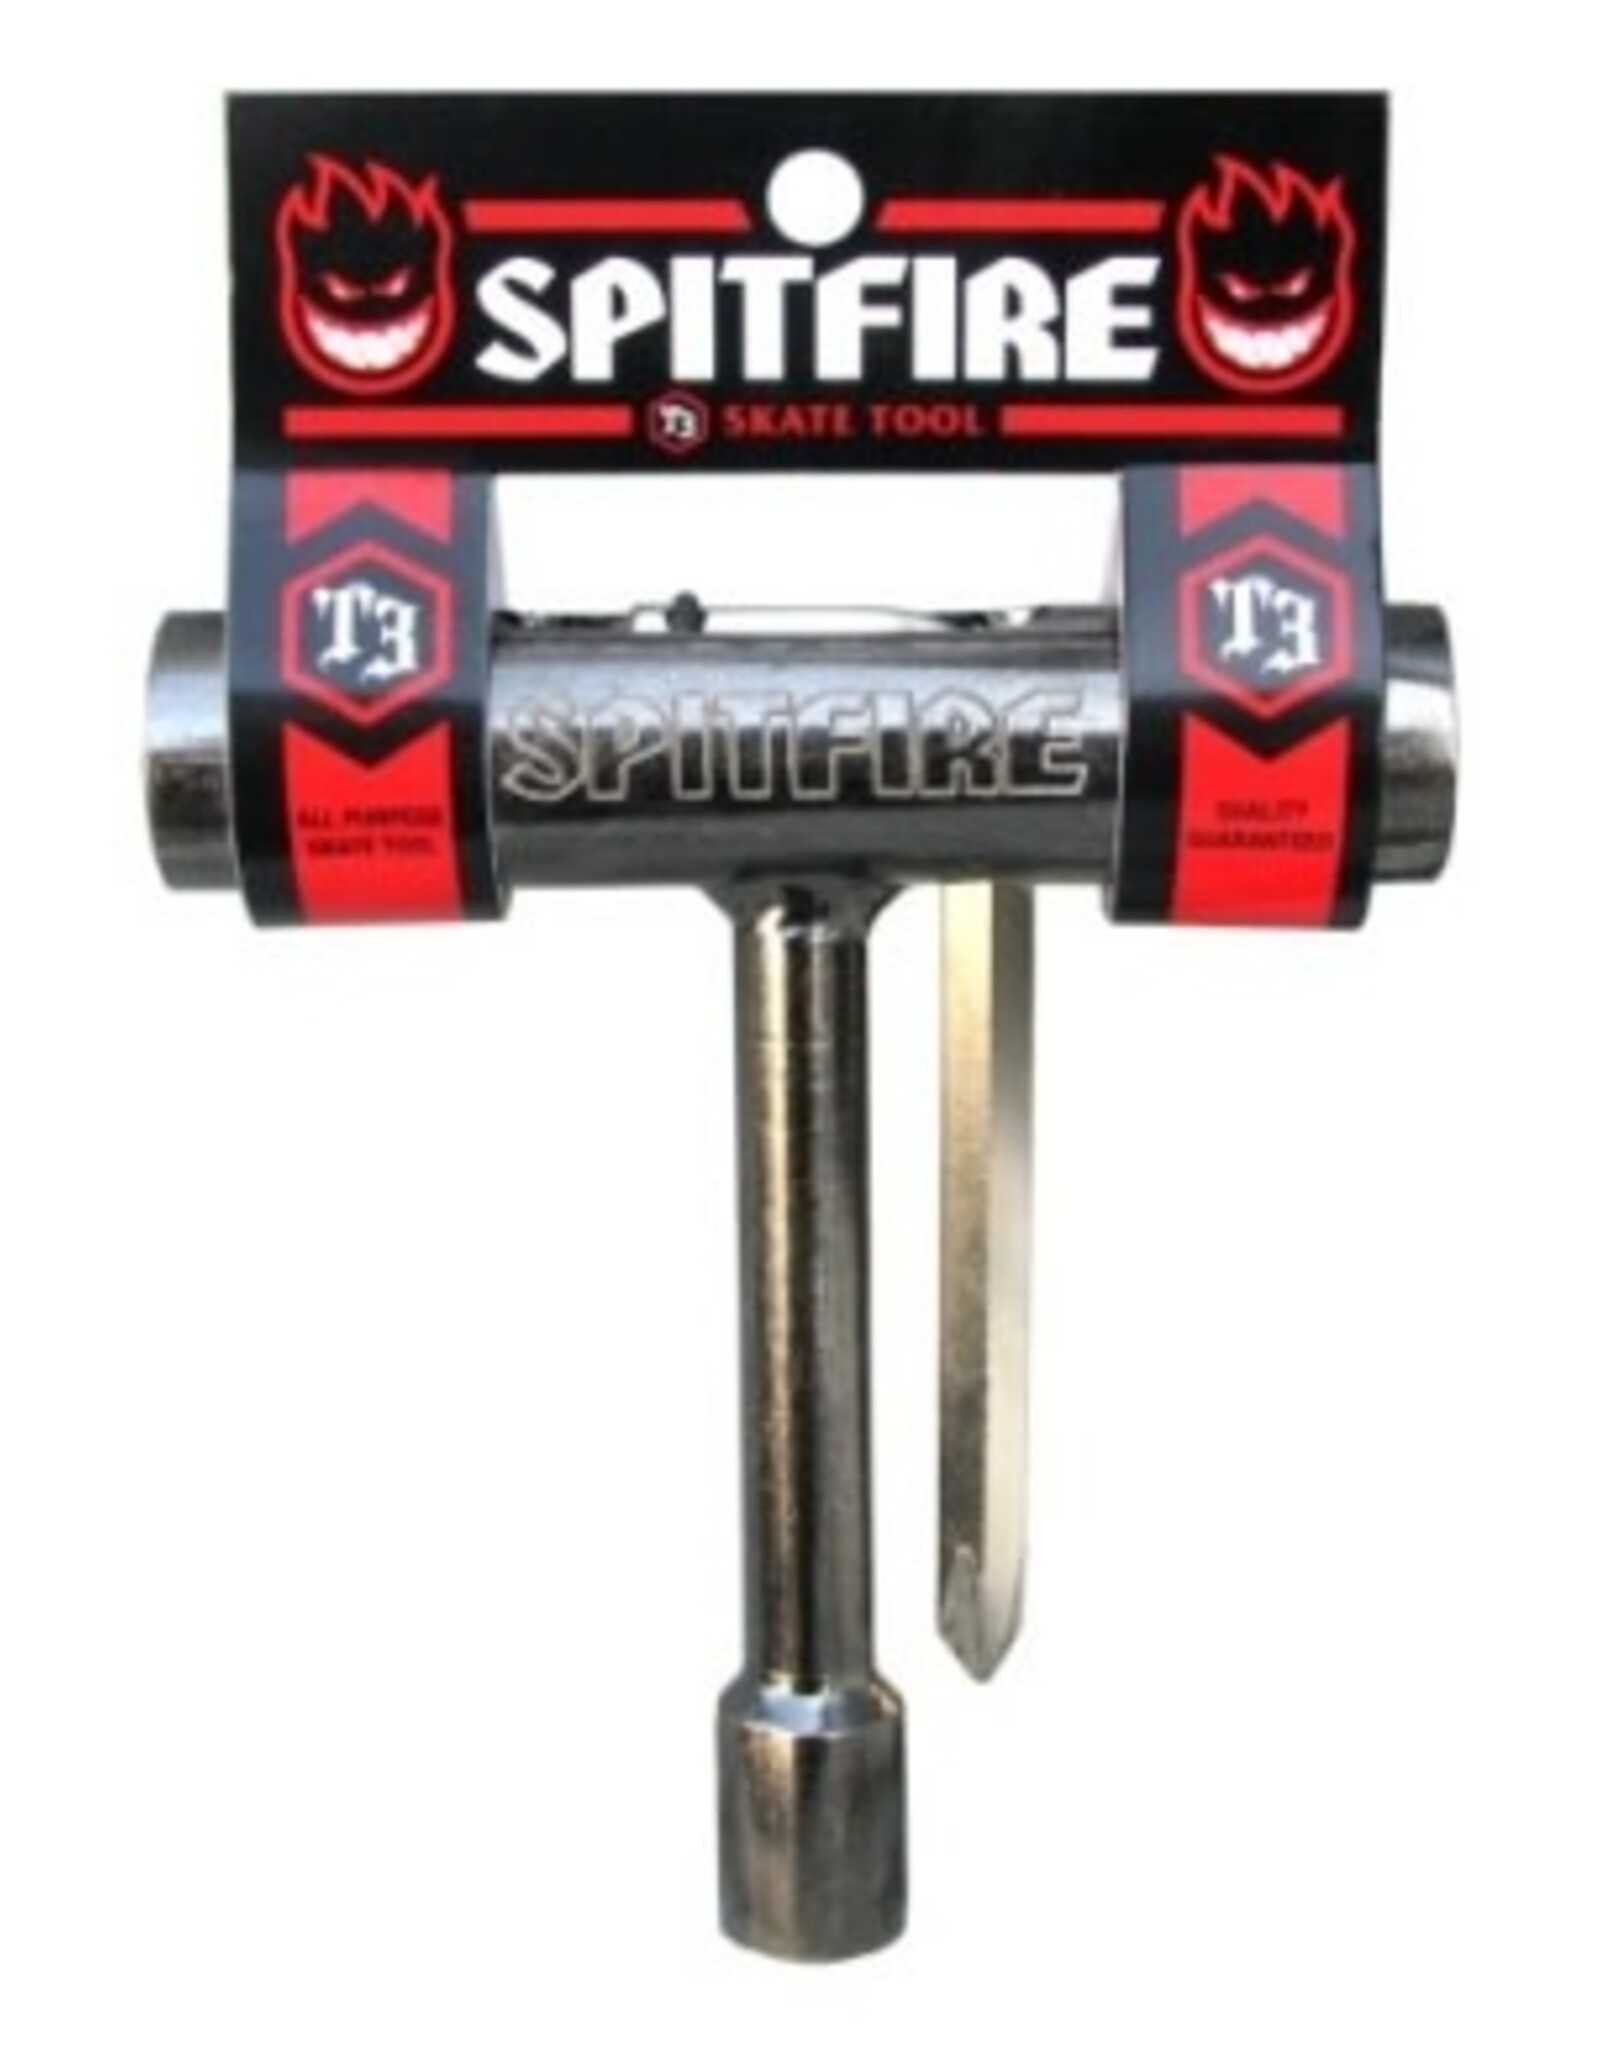 SPITEFIRE T3 TOOL